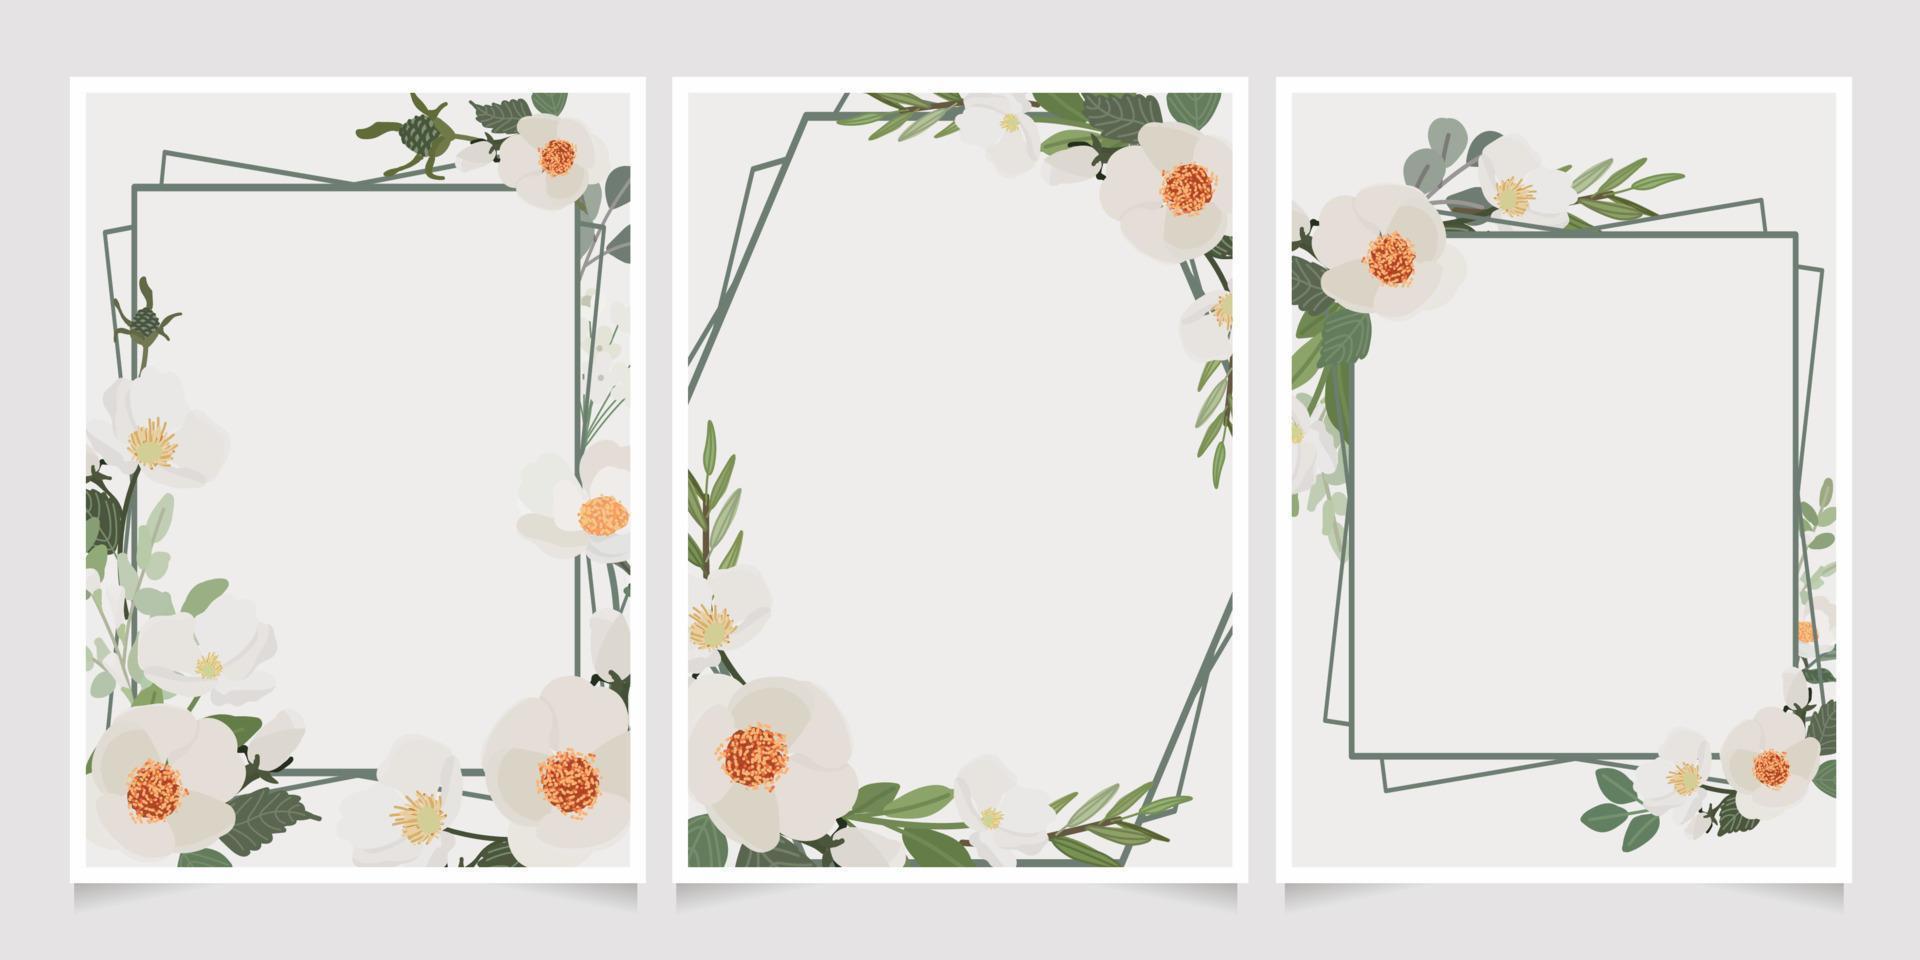 beautiful white camellia wreath frame wedding or birthday invitation card template collection vector